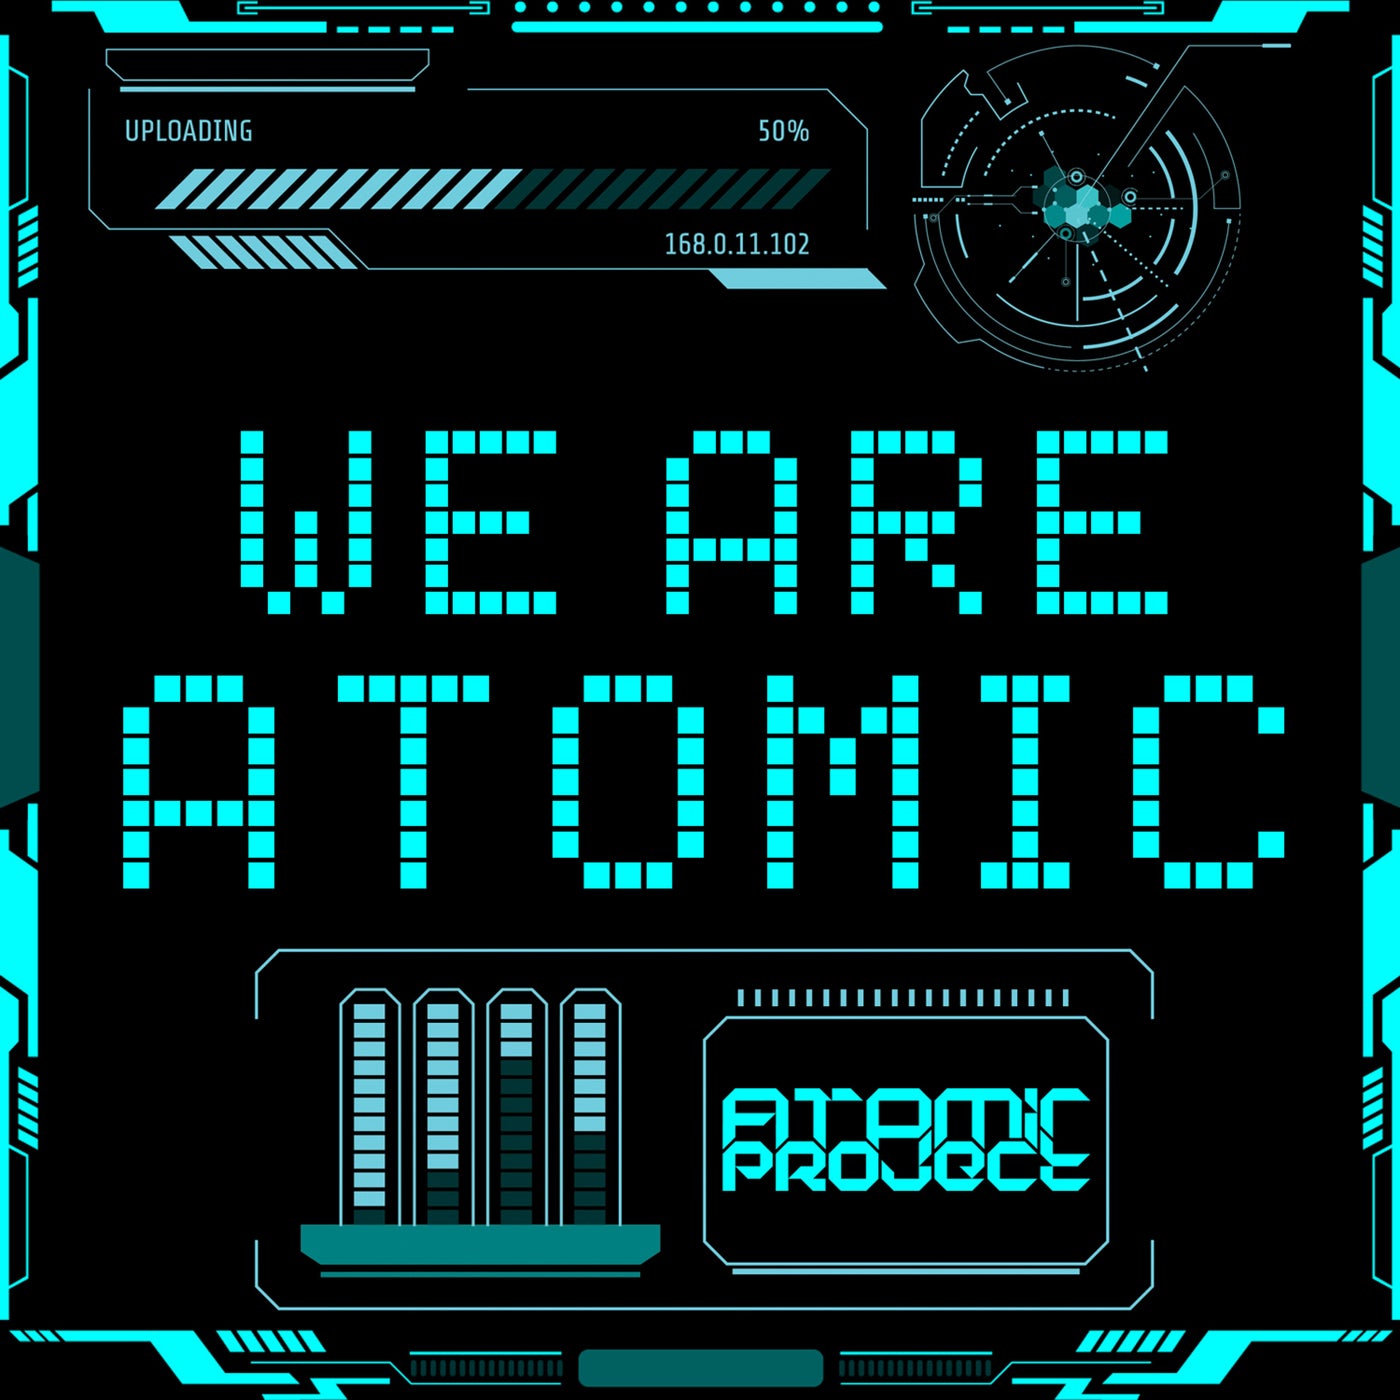 We Are Atomic